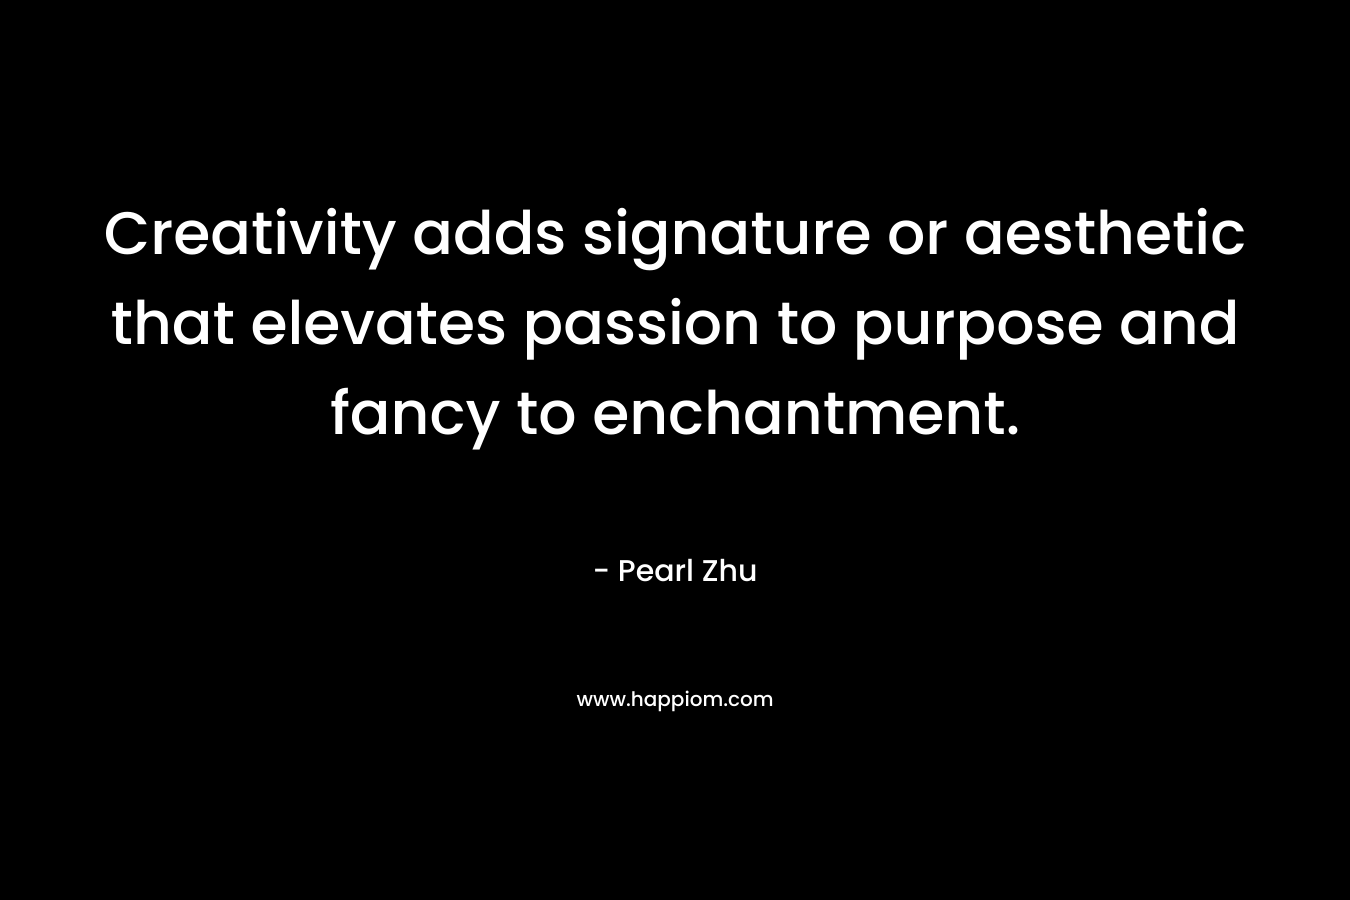 Creativity adds signature or aesthetic that elevates passion to purpose and fancy to enchantment. – Pearl Zhu